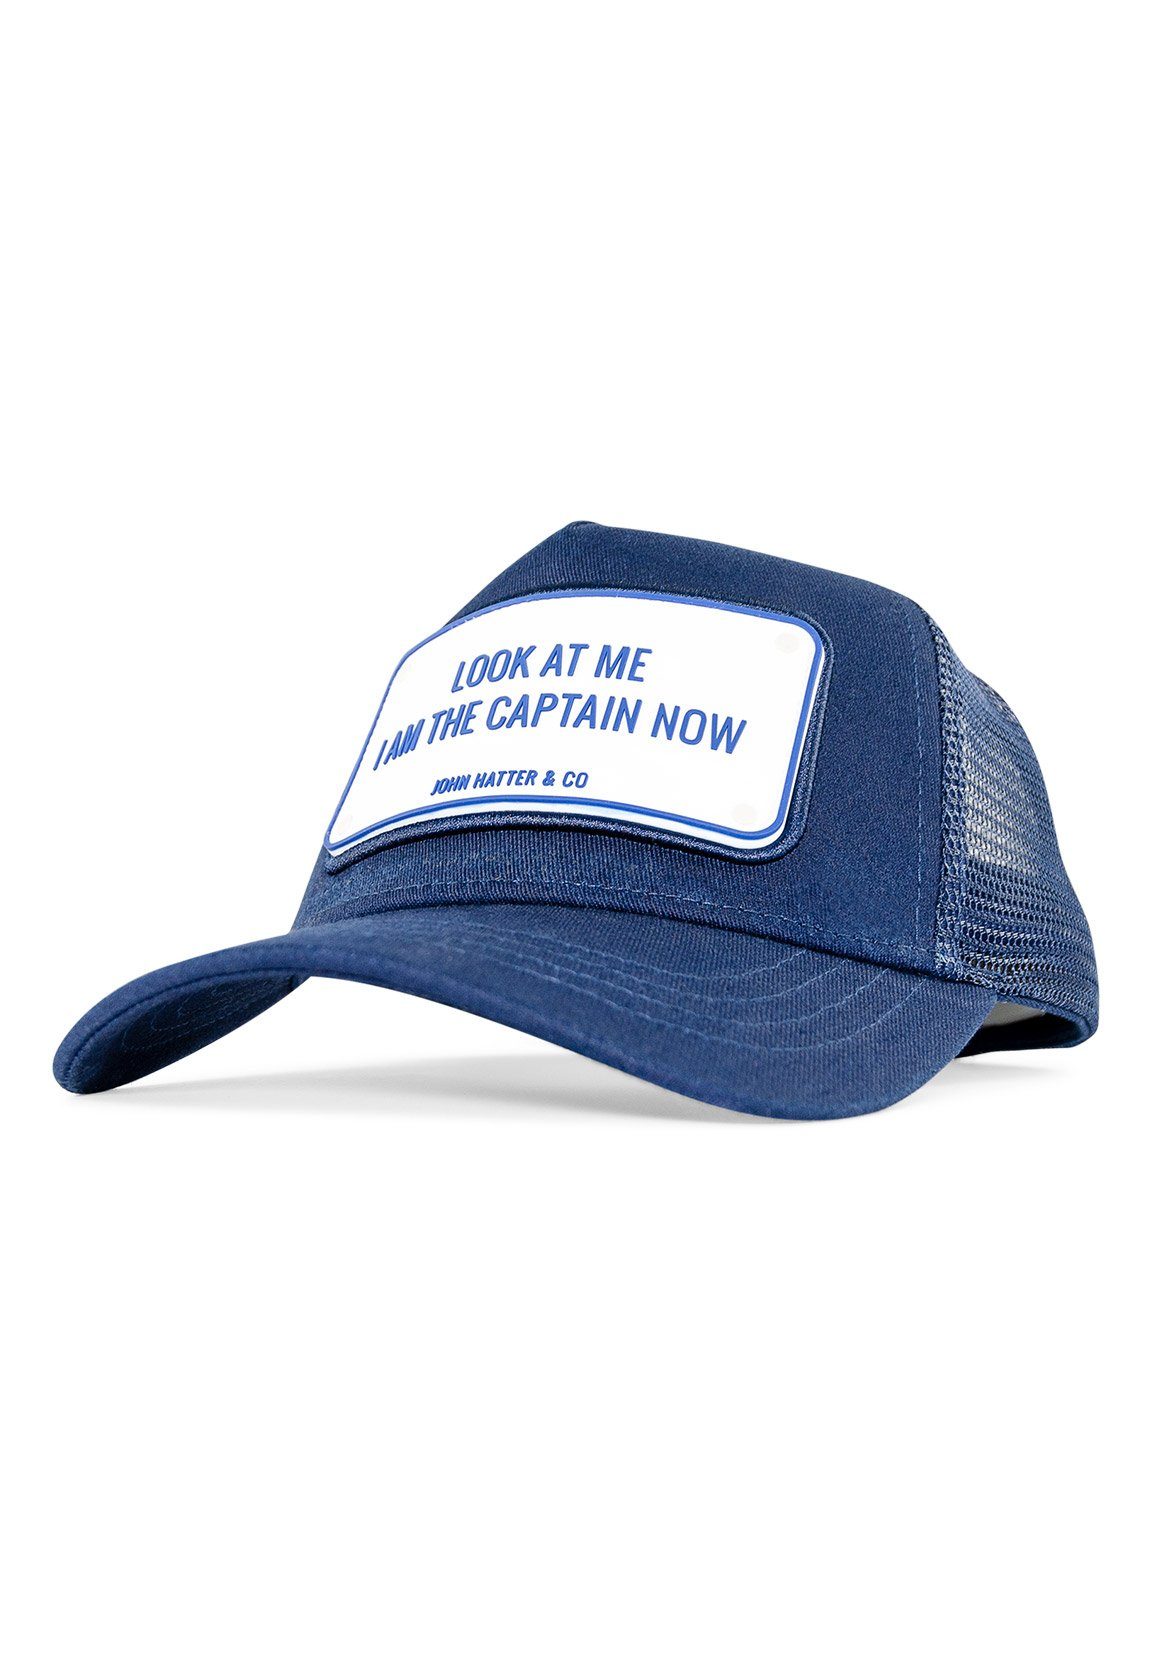 John Hatter & Co. Trucker Cap John Hatter & Co Trucker Cap LOOK AT ME I AM THE CAPTAIN NOW Rubber